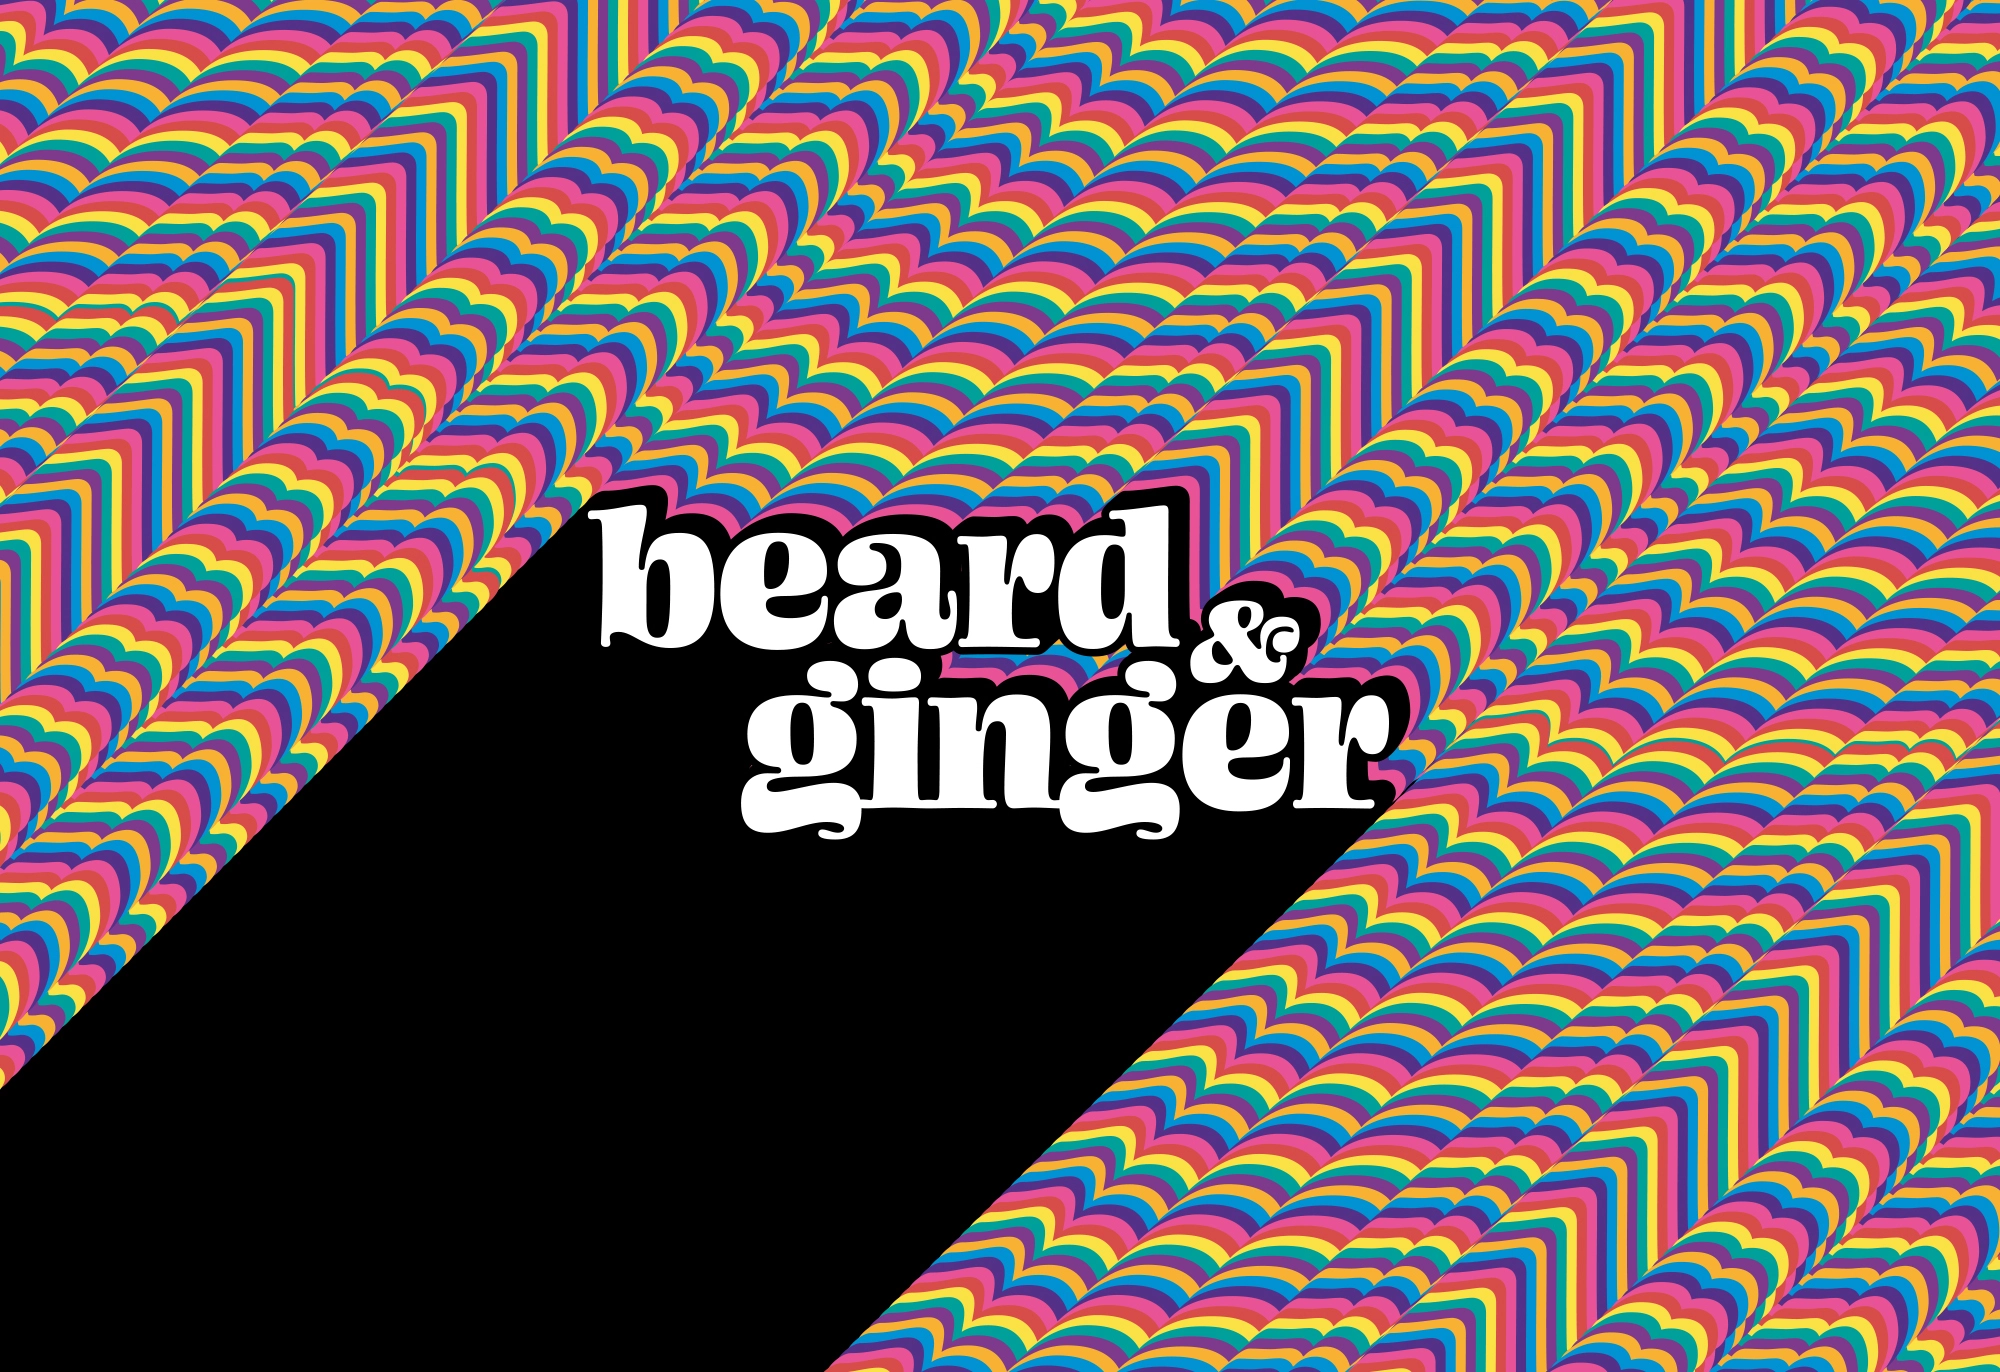 the Beard and Ginger logo with its colourful rainbow effect dropshadow background